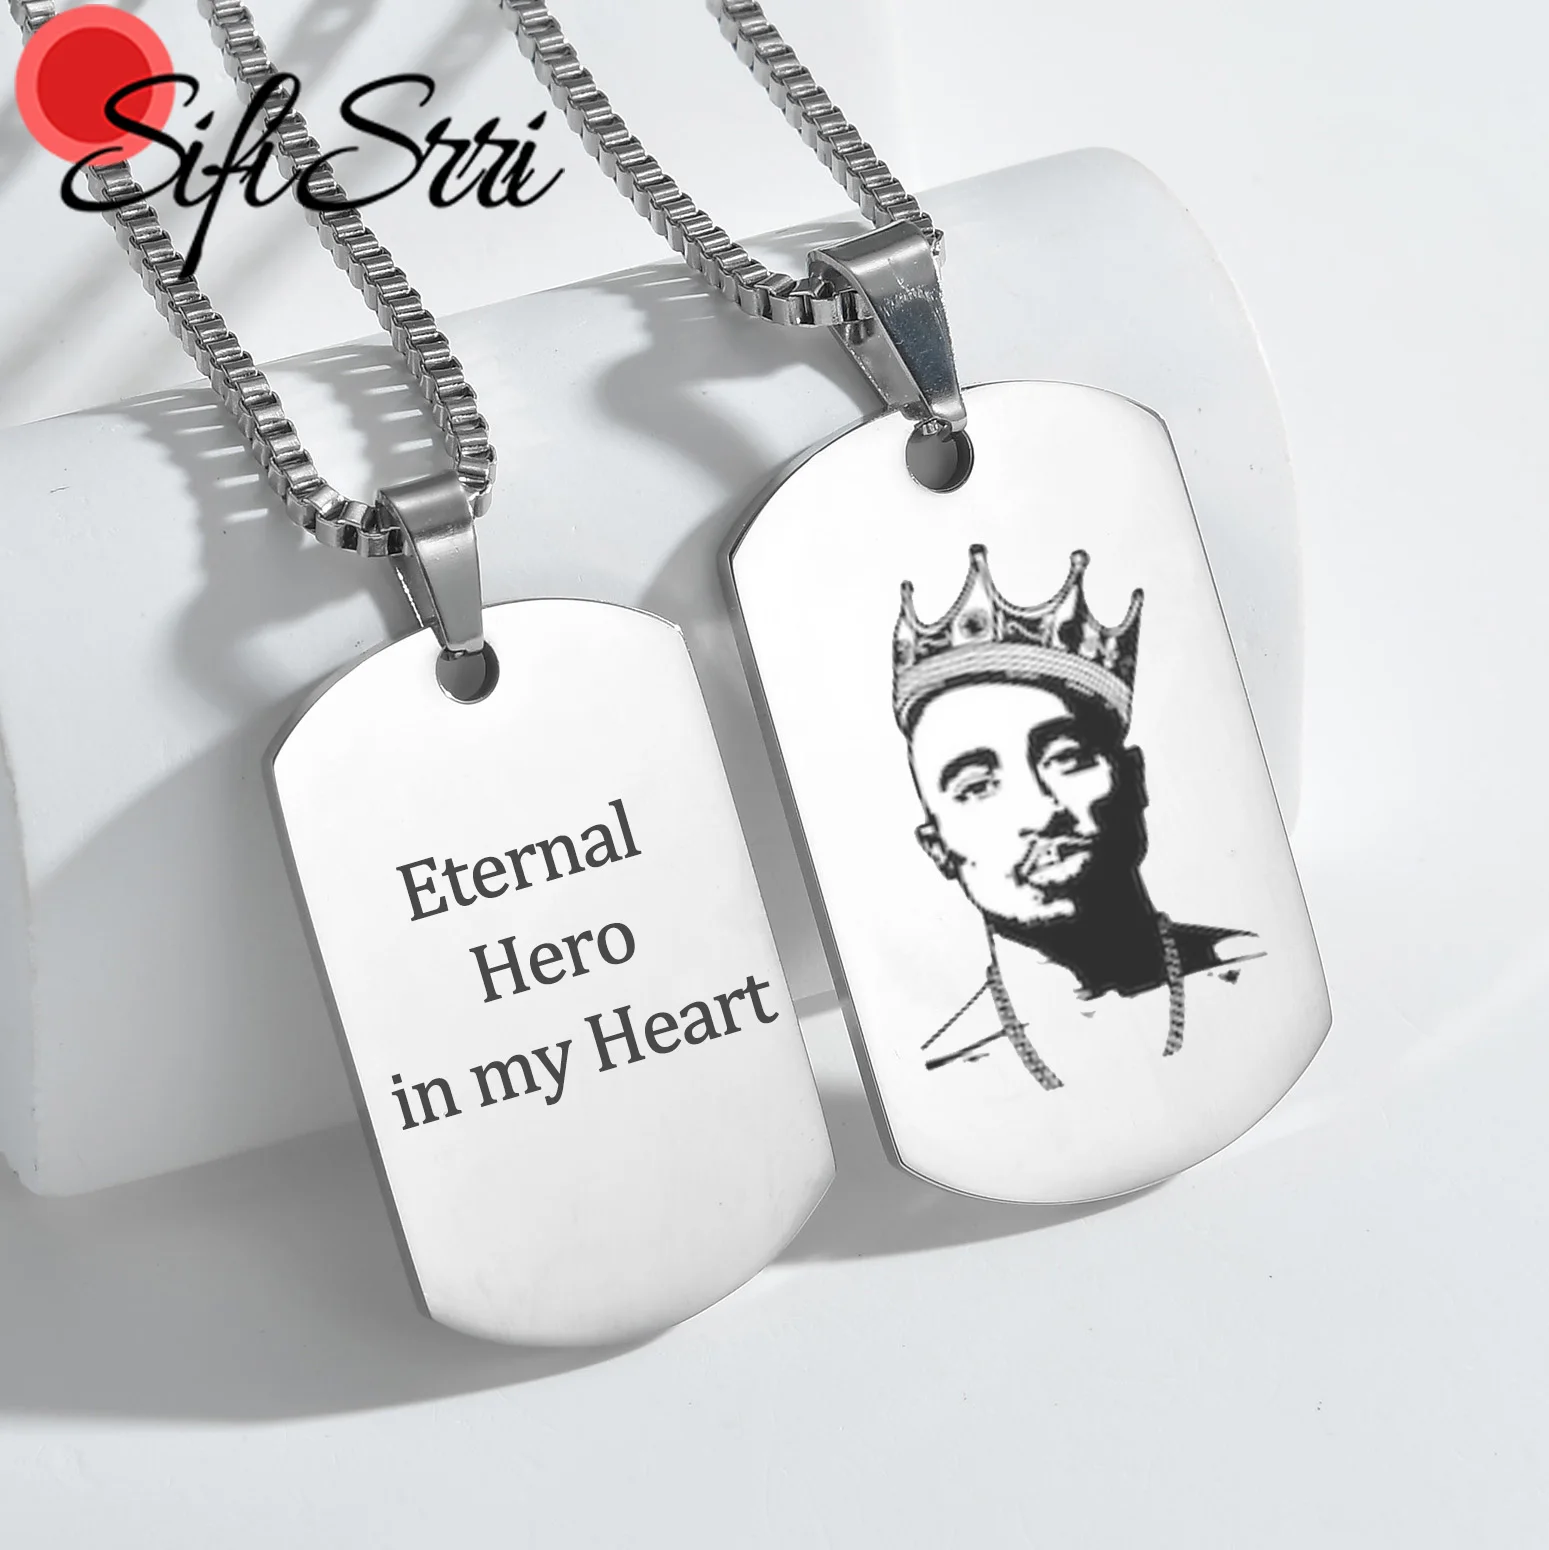 

Sifisrri Personalized Engraved Picture Name Rectangle Pendant Necklace For Women Men Fashion Family Customized Jewelry Gift